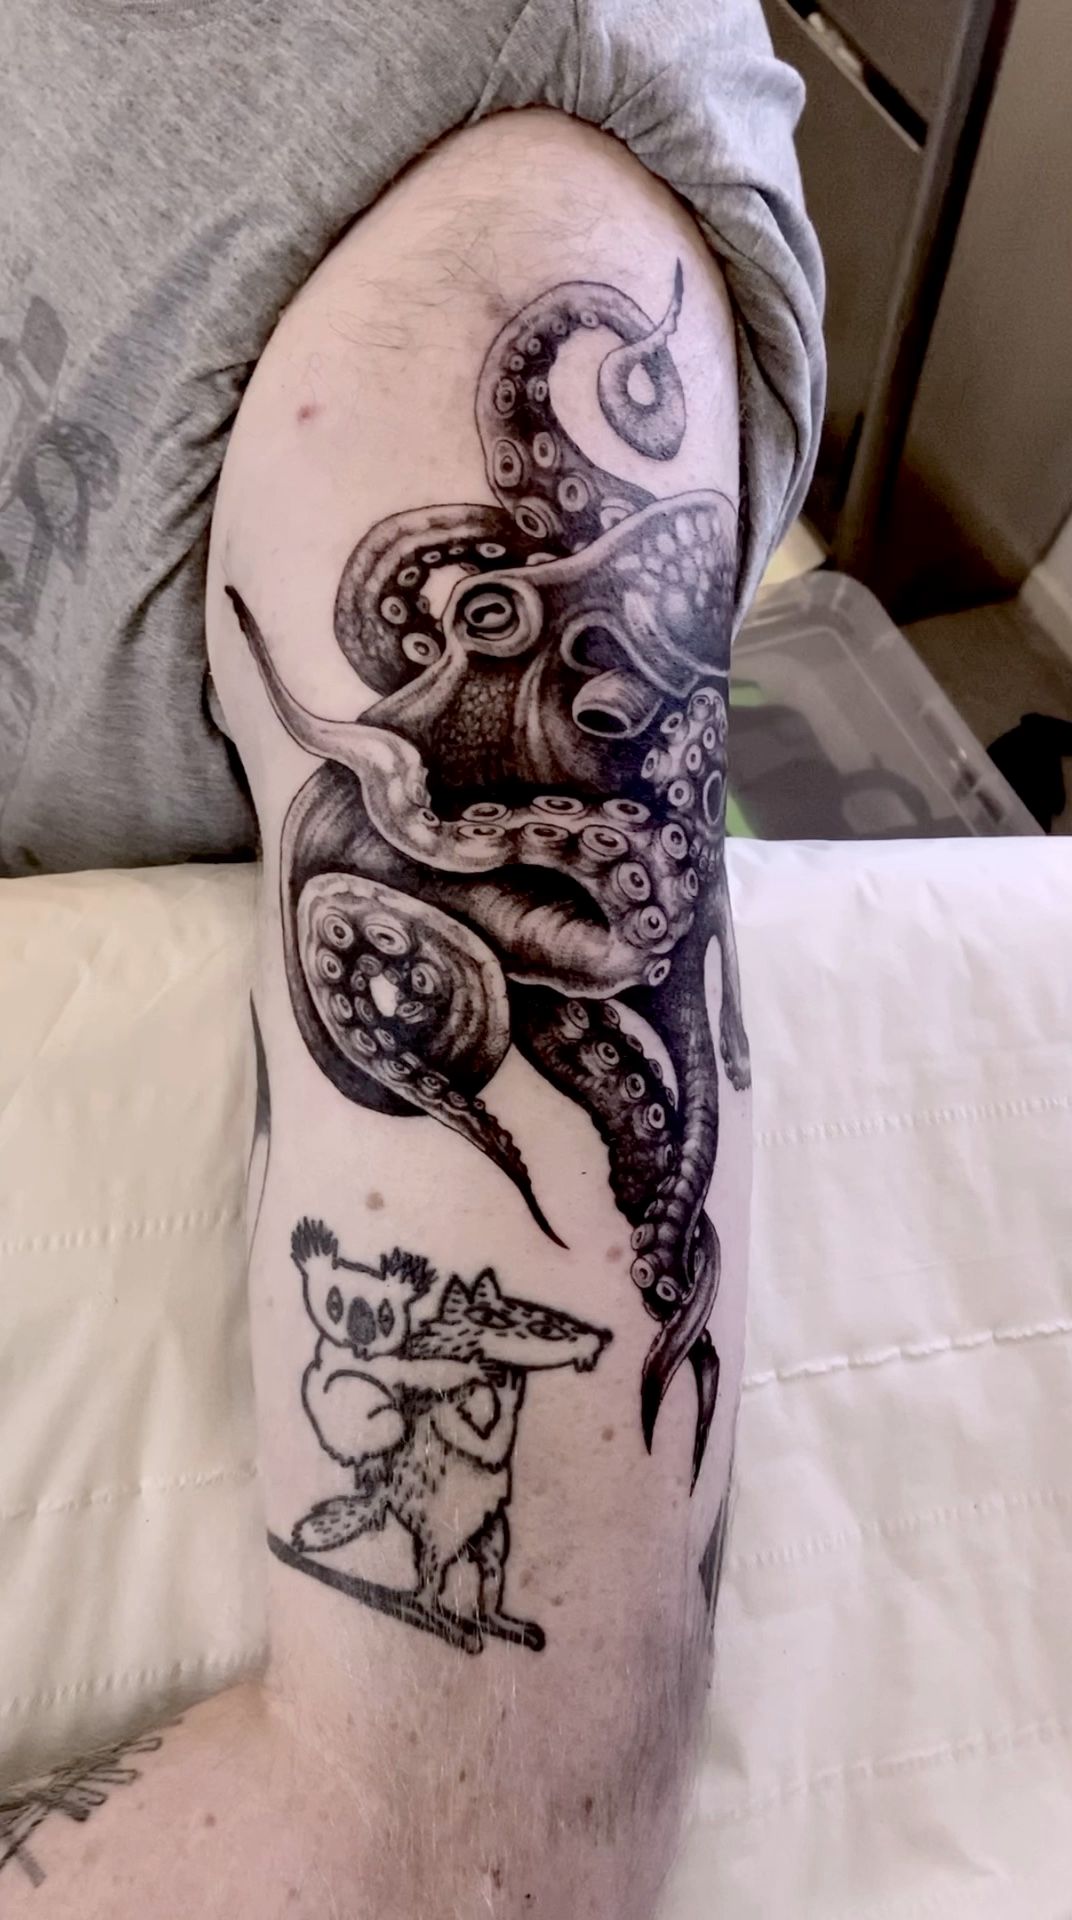 Incredible Octopus coverup tattoo by Meghan Patrick 12ozstudios  team12oz tattoos tattooartist coverup octopus tat  Cover up tattoo  Drum tattoo Tattoos